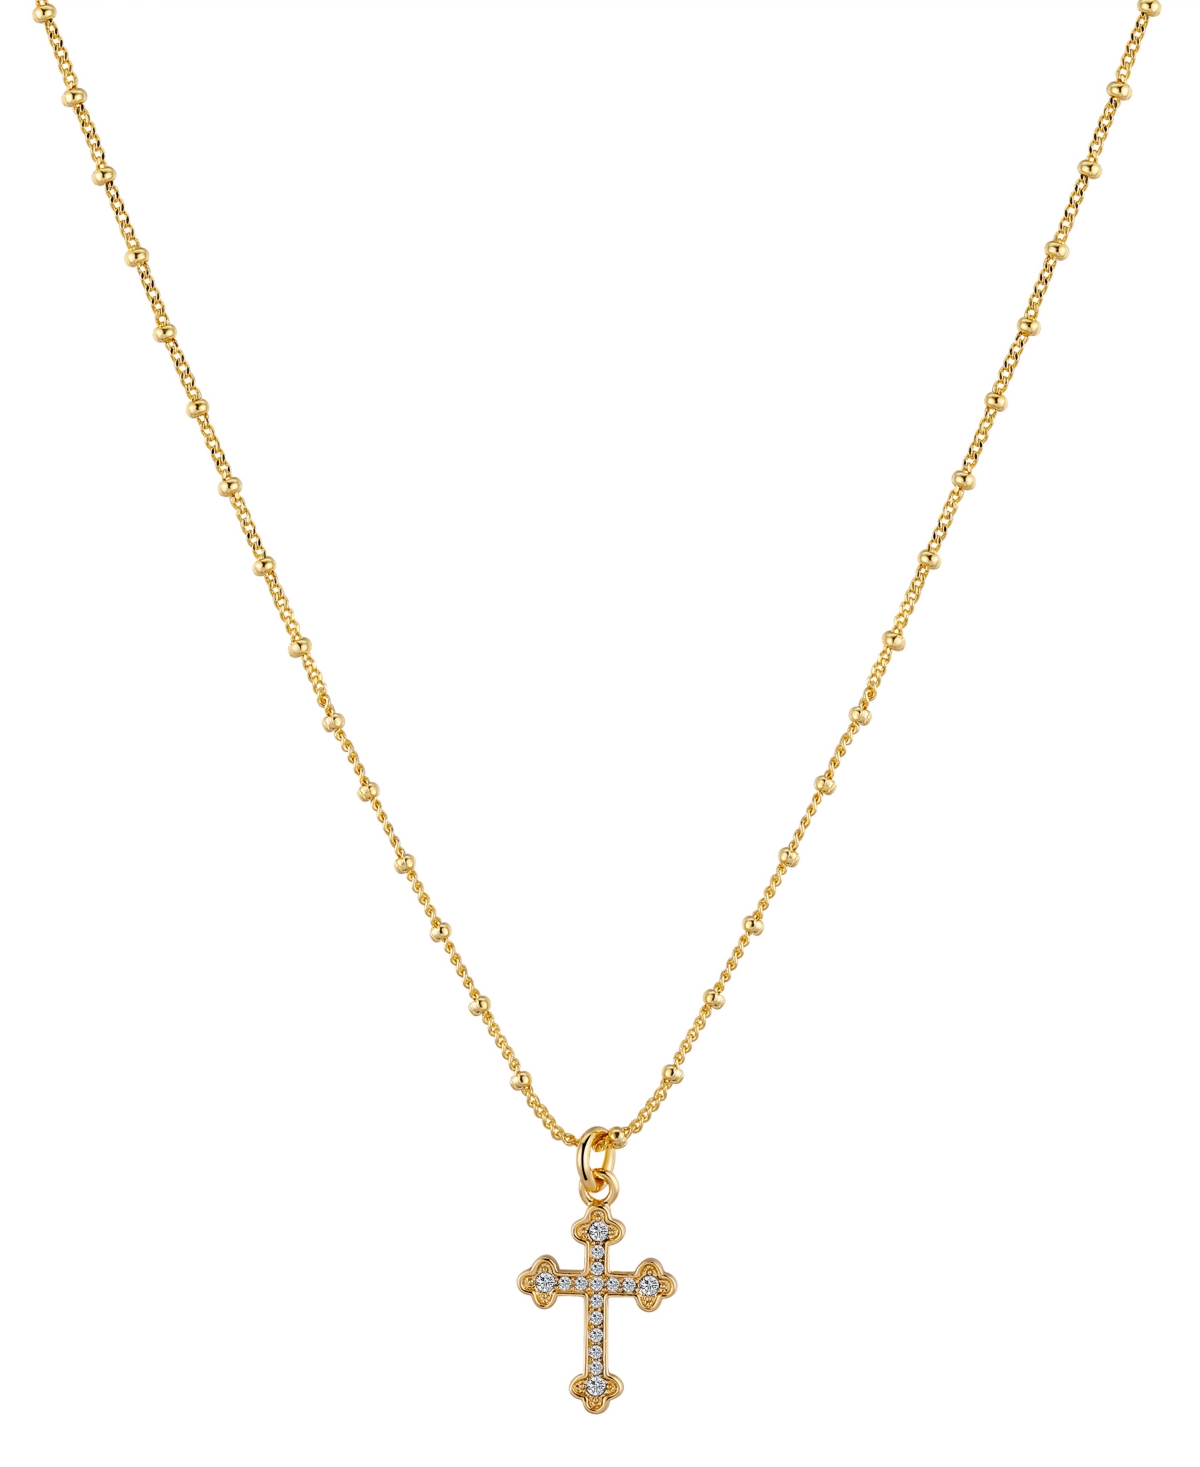 Unwritten 14k Gold Plated Crystal Cross Pendant Necklace